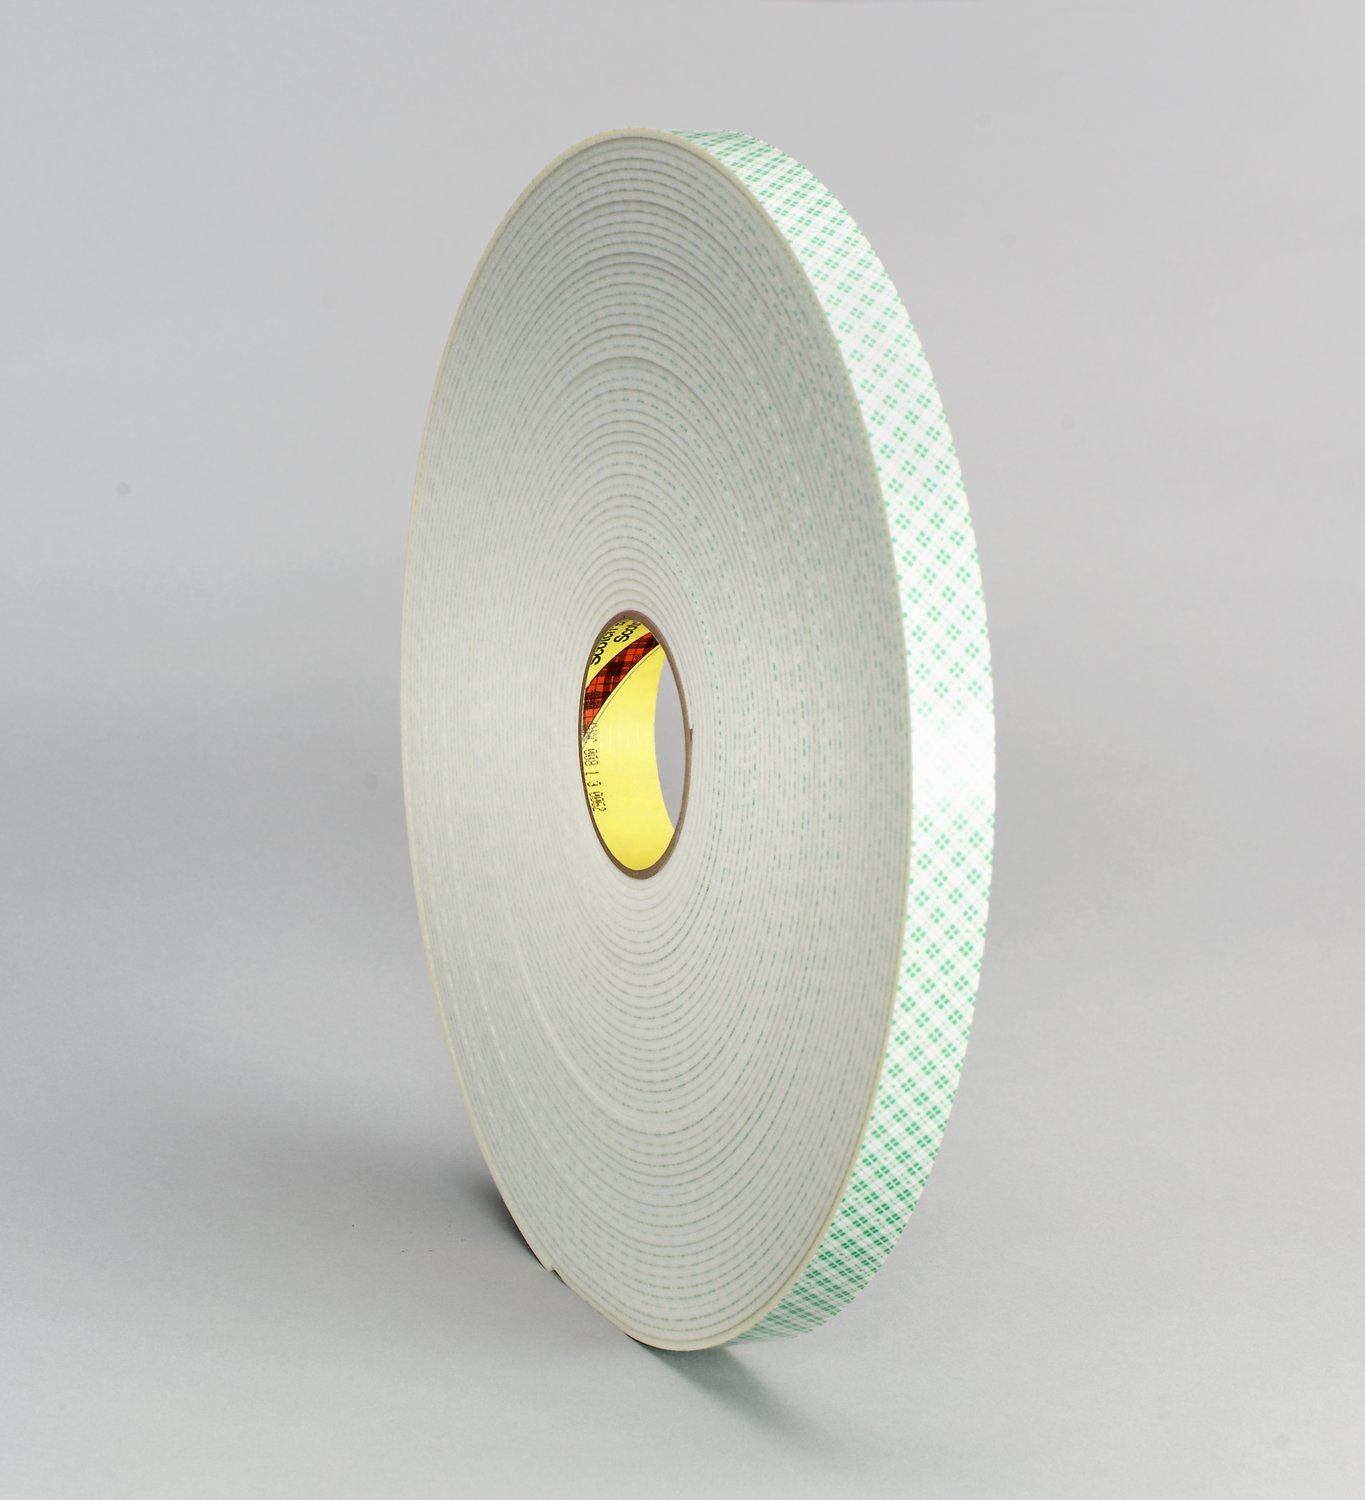 7000048827 - 3M Double Coated Urethane Foam Tape 4008, Off White, 15 in x 36 yd, 125
mil, 1 roll per case